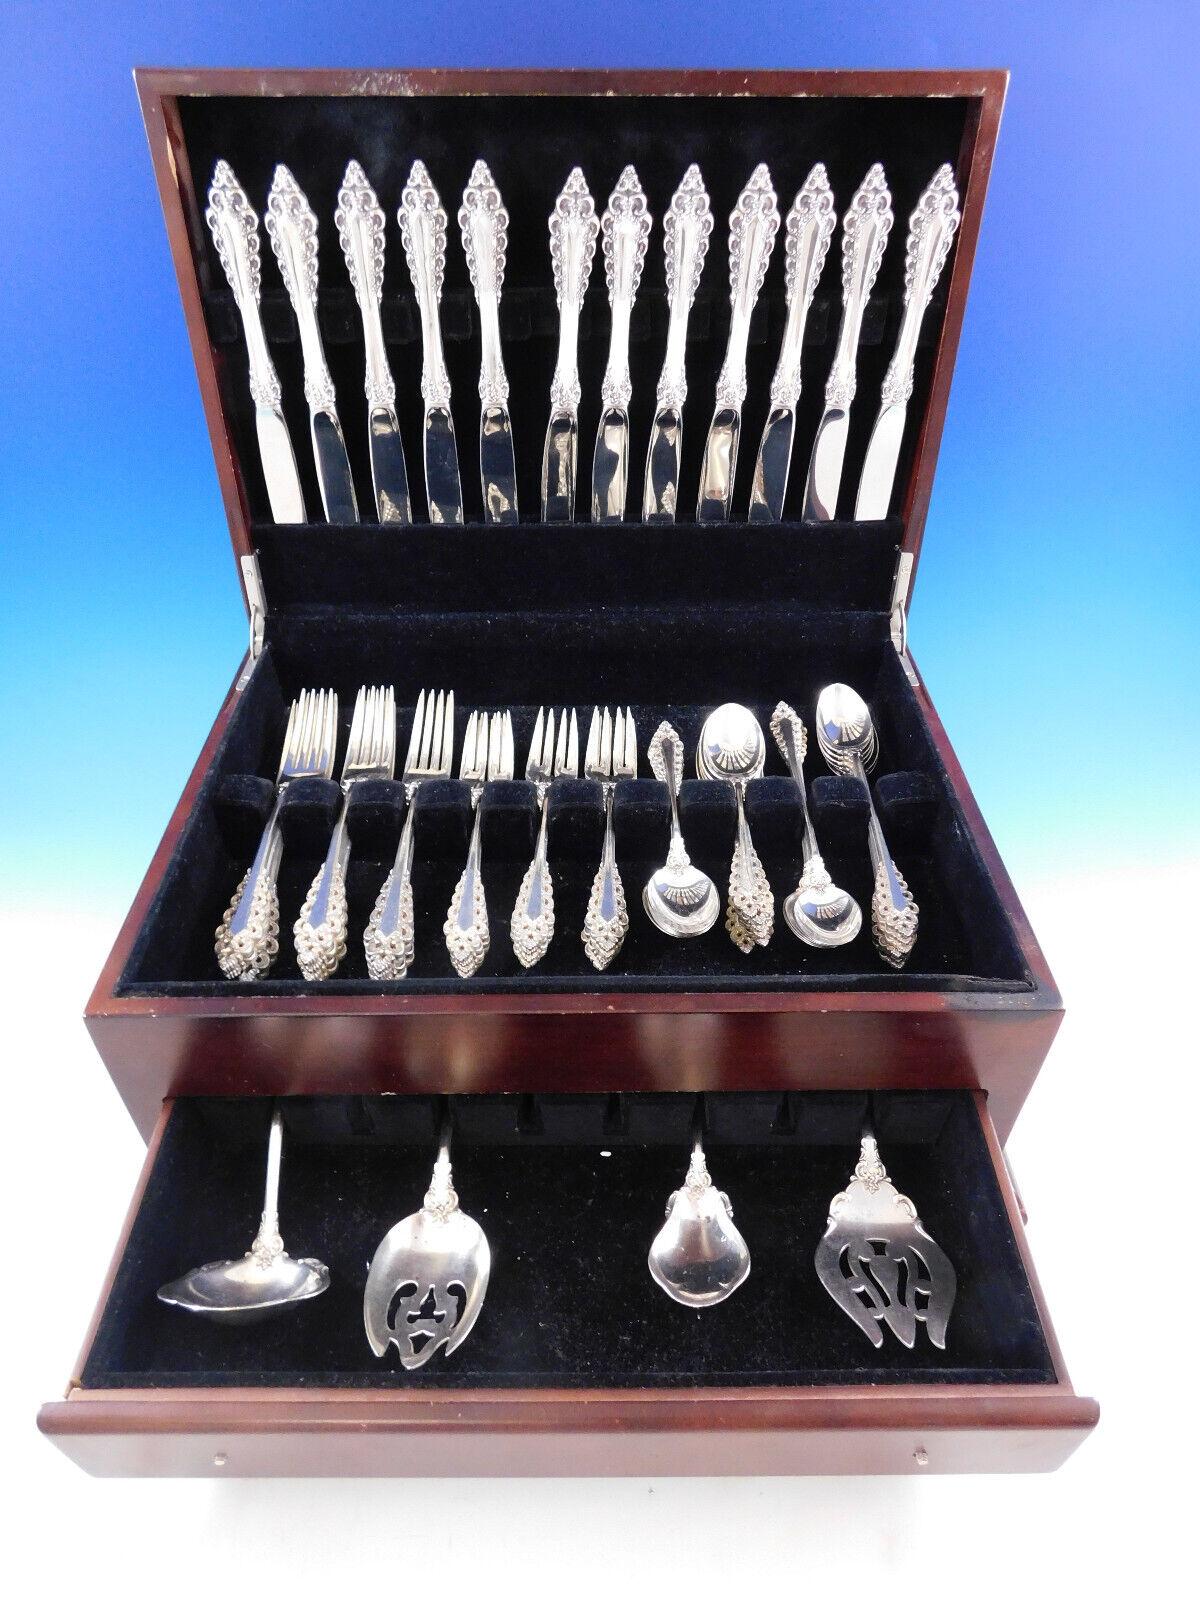 Florentine scroll by Lunt sterling silver flatware set, 64 pieces. This set includes:

12 knives, 9